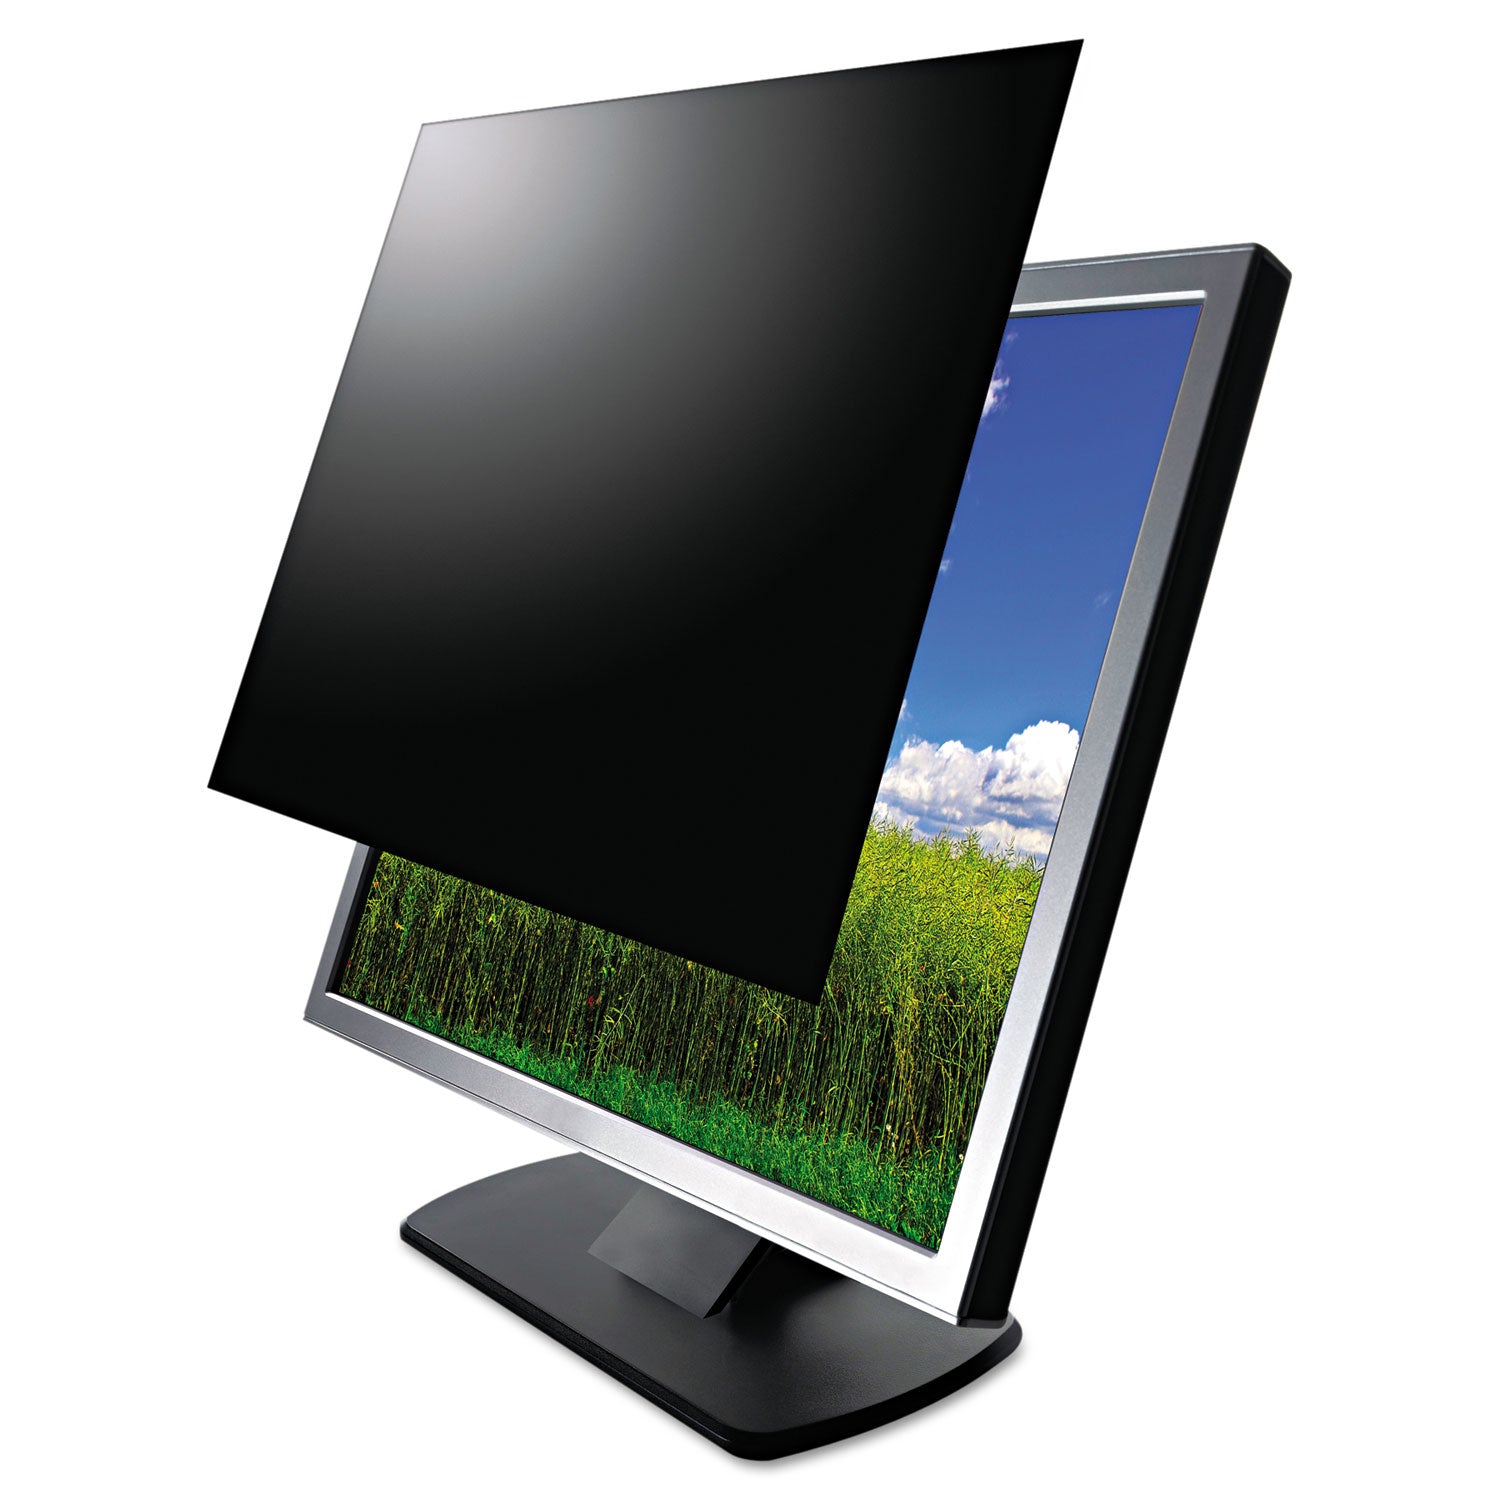 Secure View LCD Privacy Filter for 24" Widescreen Flat Panel Monitor, 16.9 Aspect Ratio - 